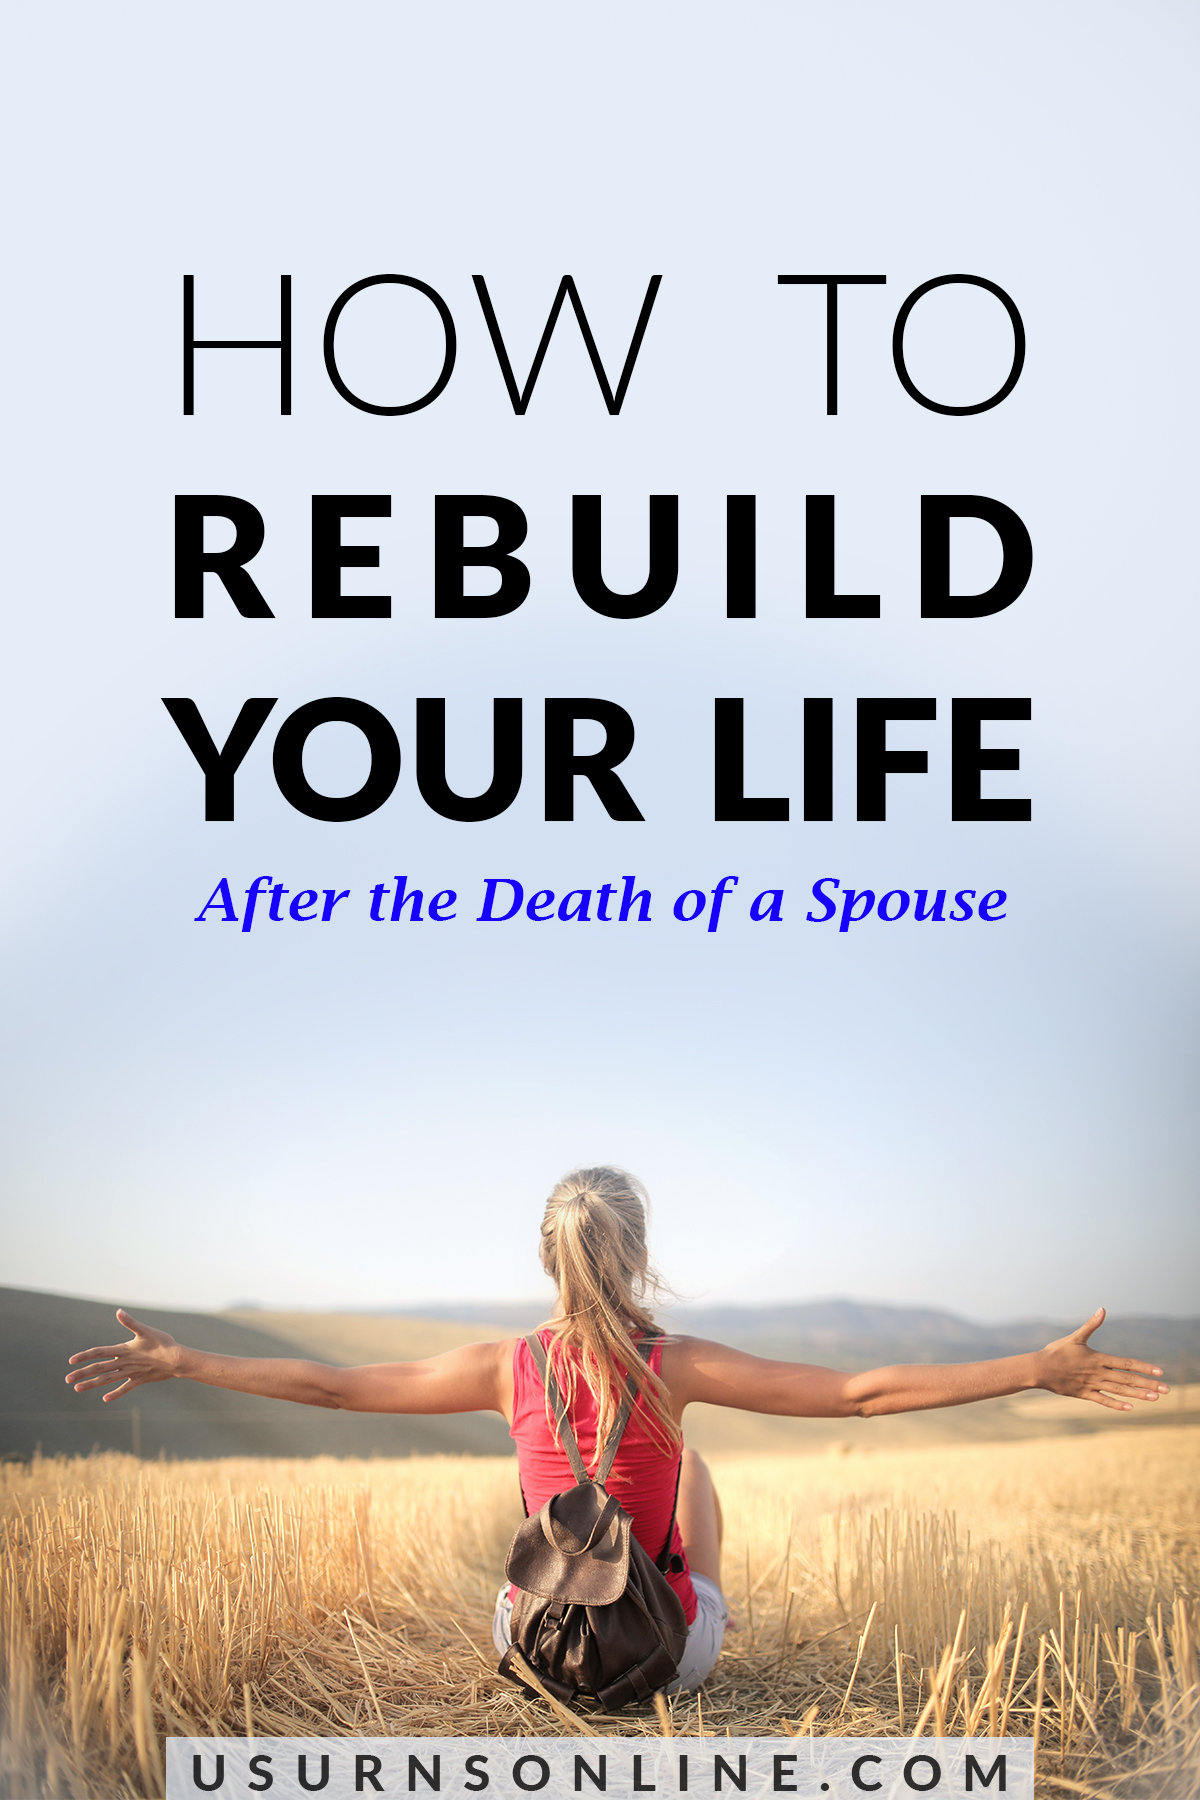 how to rebuild your life after death of spouse - feature image